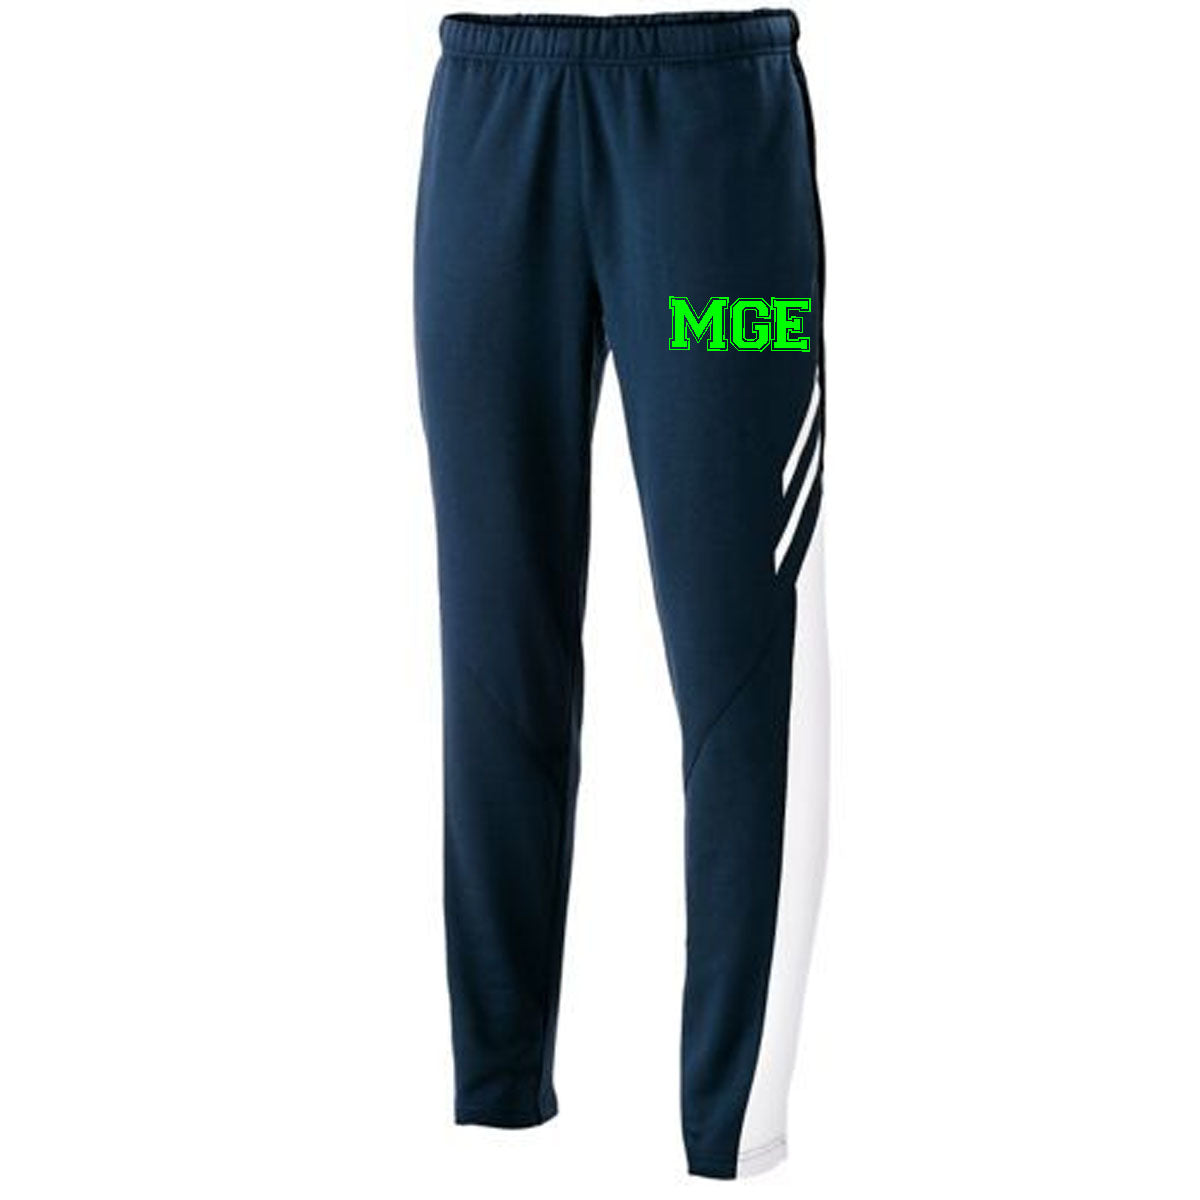 Elite - MGE Varsity Holloway Youth Flux Tapered Leg Pant (229670) - Navy Heather/White/White - Southern Grace Creations